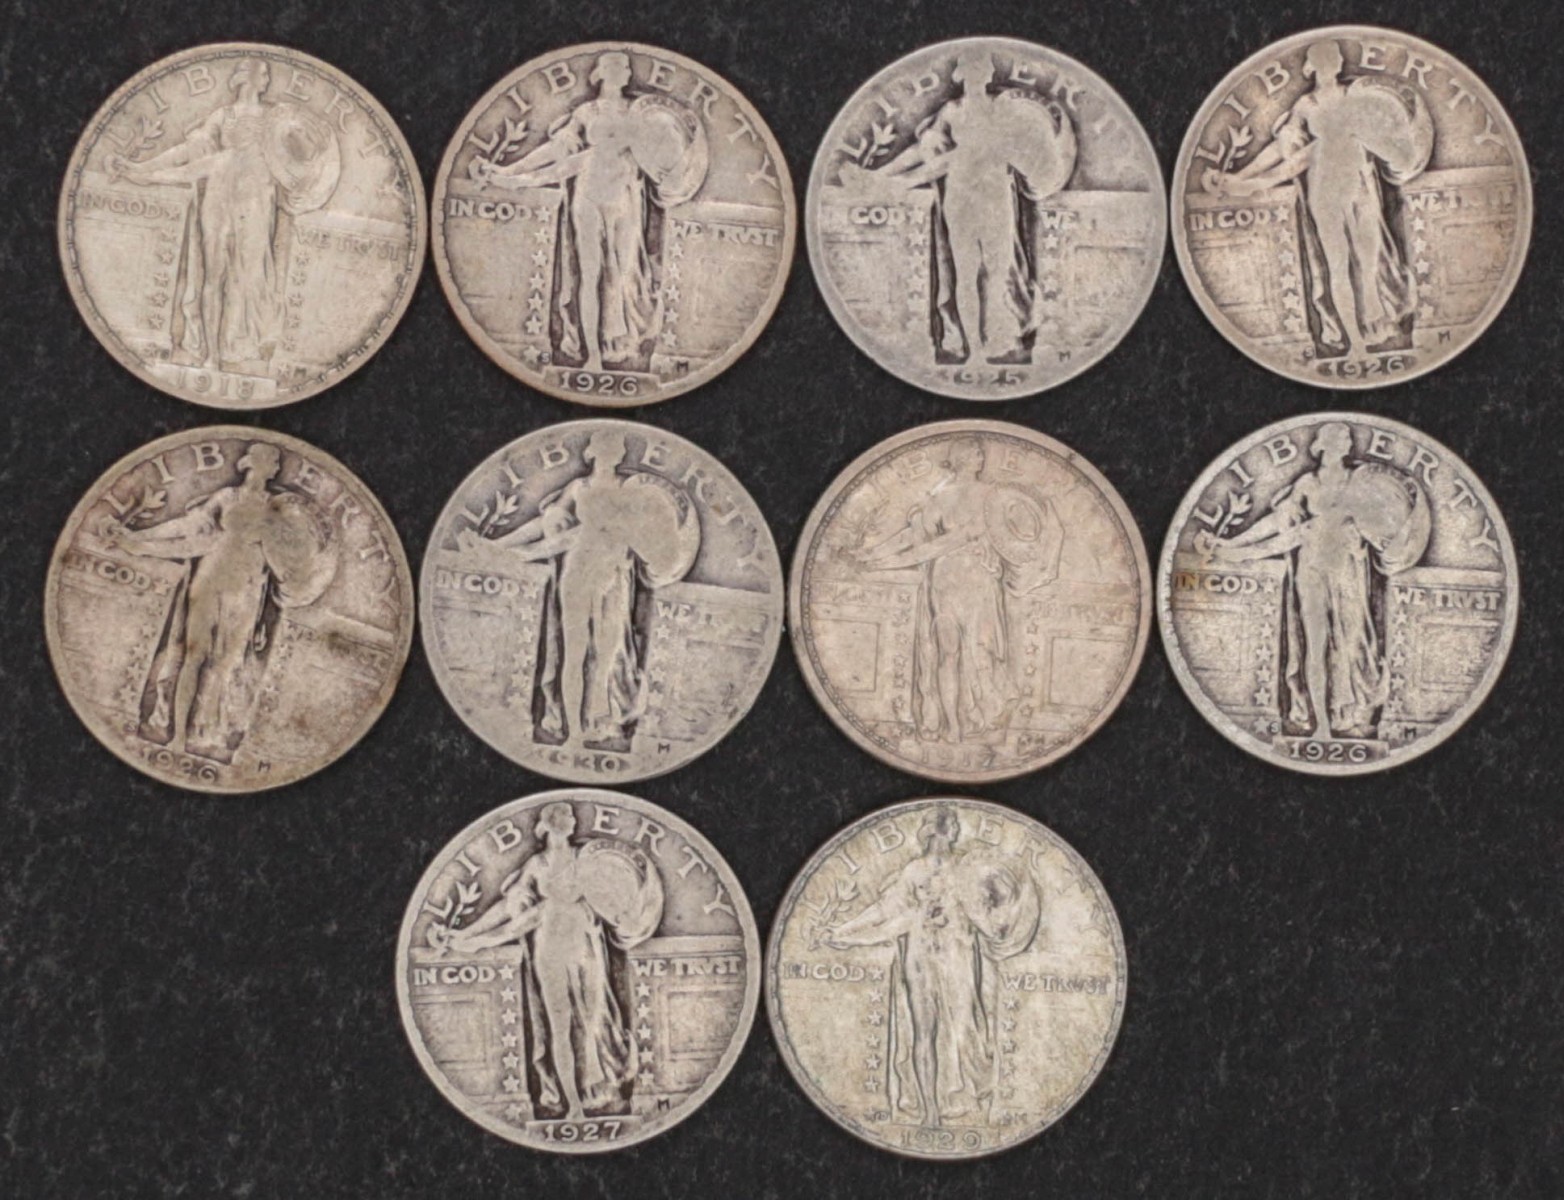 $2.50 FACE VALUE STANDING LIBERTY QUARTERS